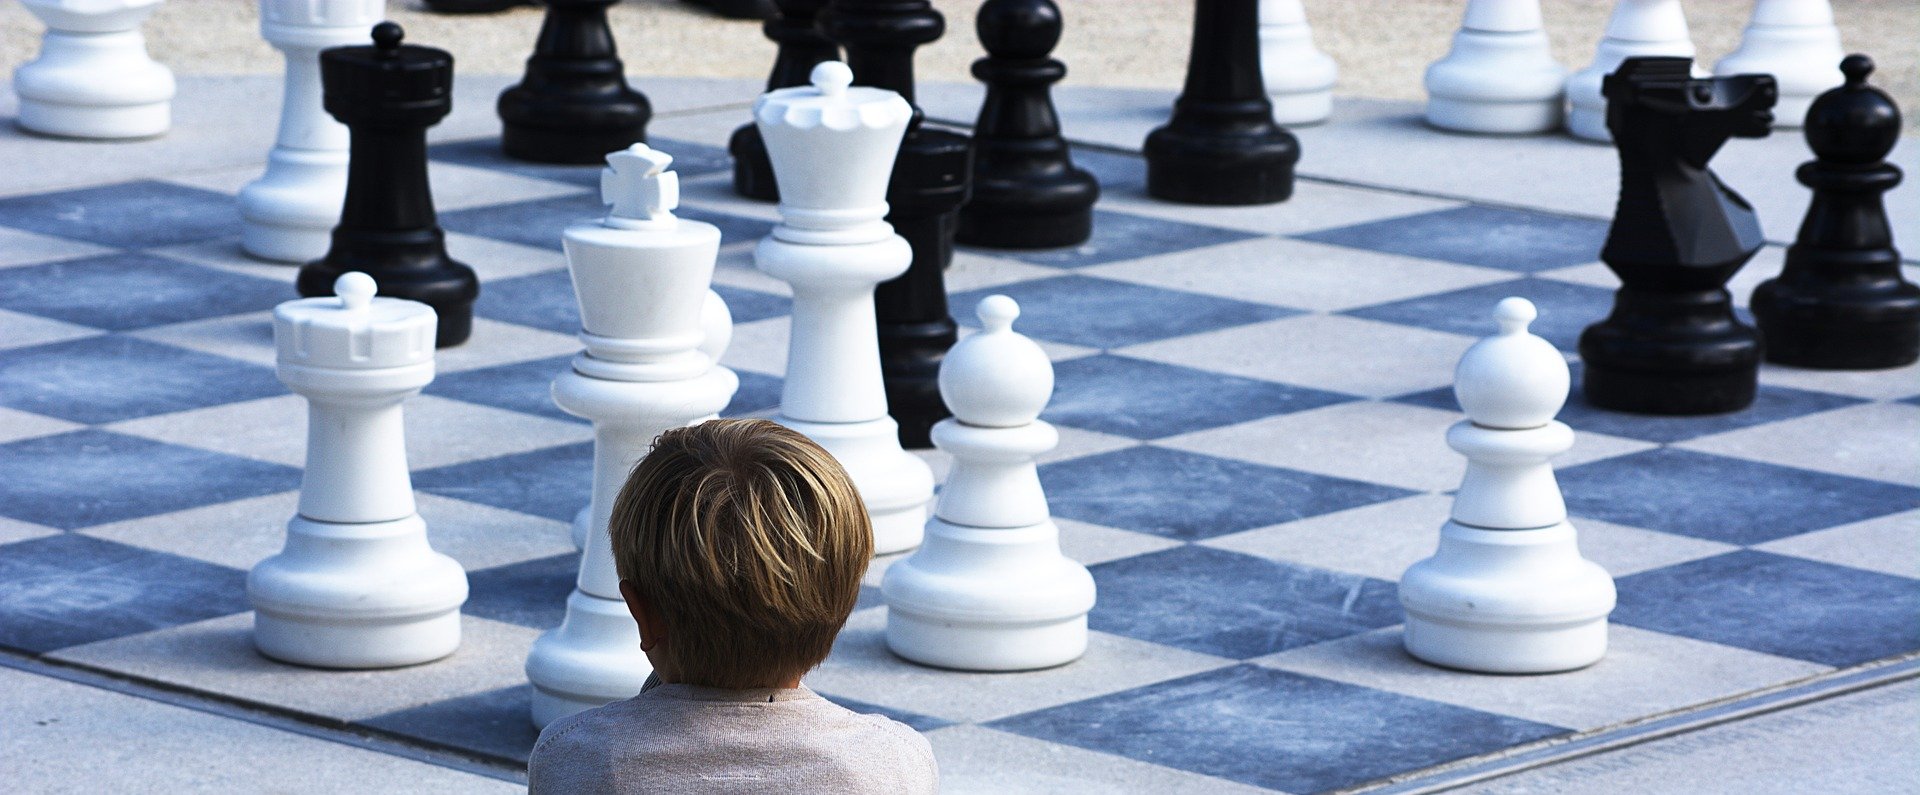 A boy looking at the chess pieces